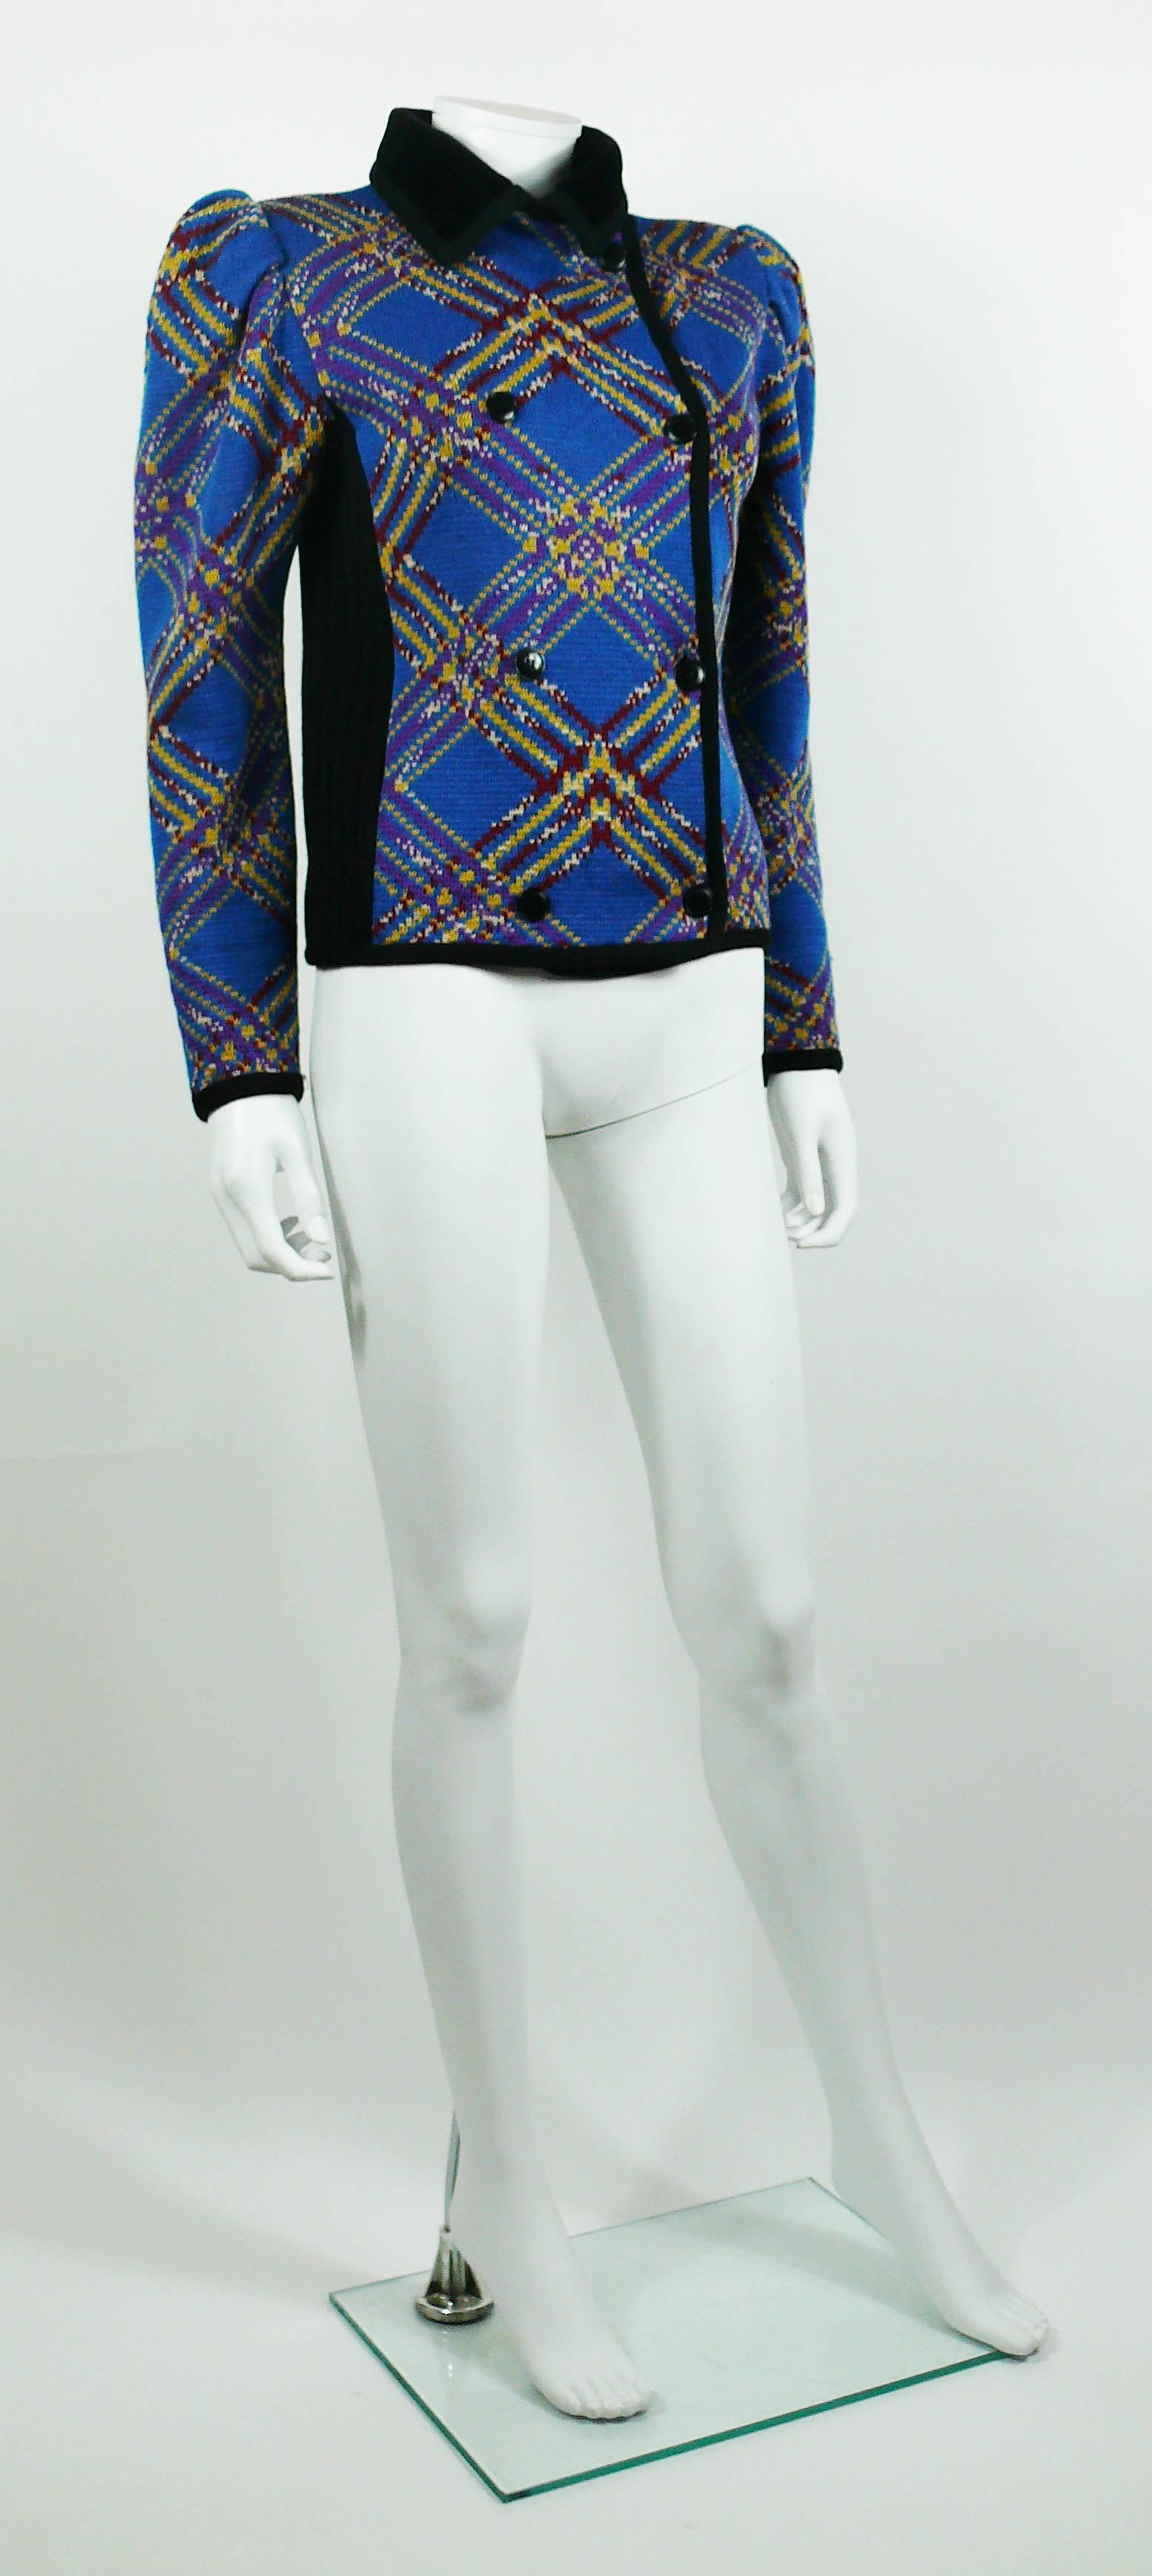 YVES SAINT LAURENT Rive Gauche vintage knit cardigan sweater.

Features :
- Multicolored geometric design on a blue background (please note that real blue color shade is slightly different than on pictures).
- Black velvet collar.
- Front